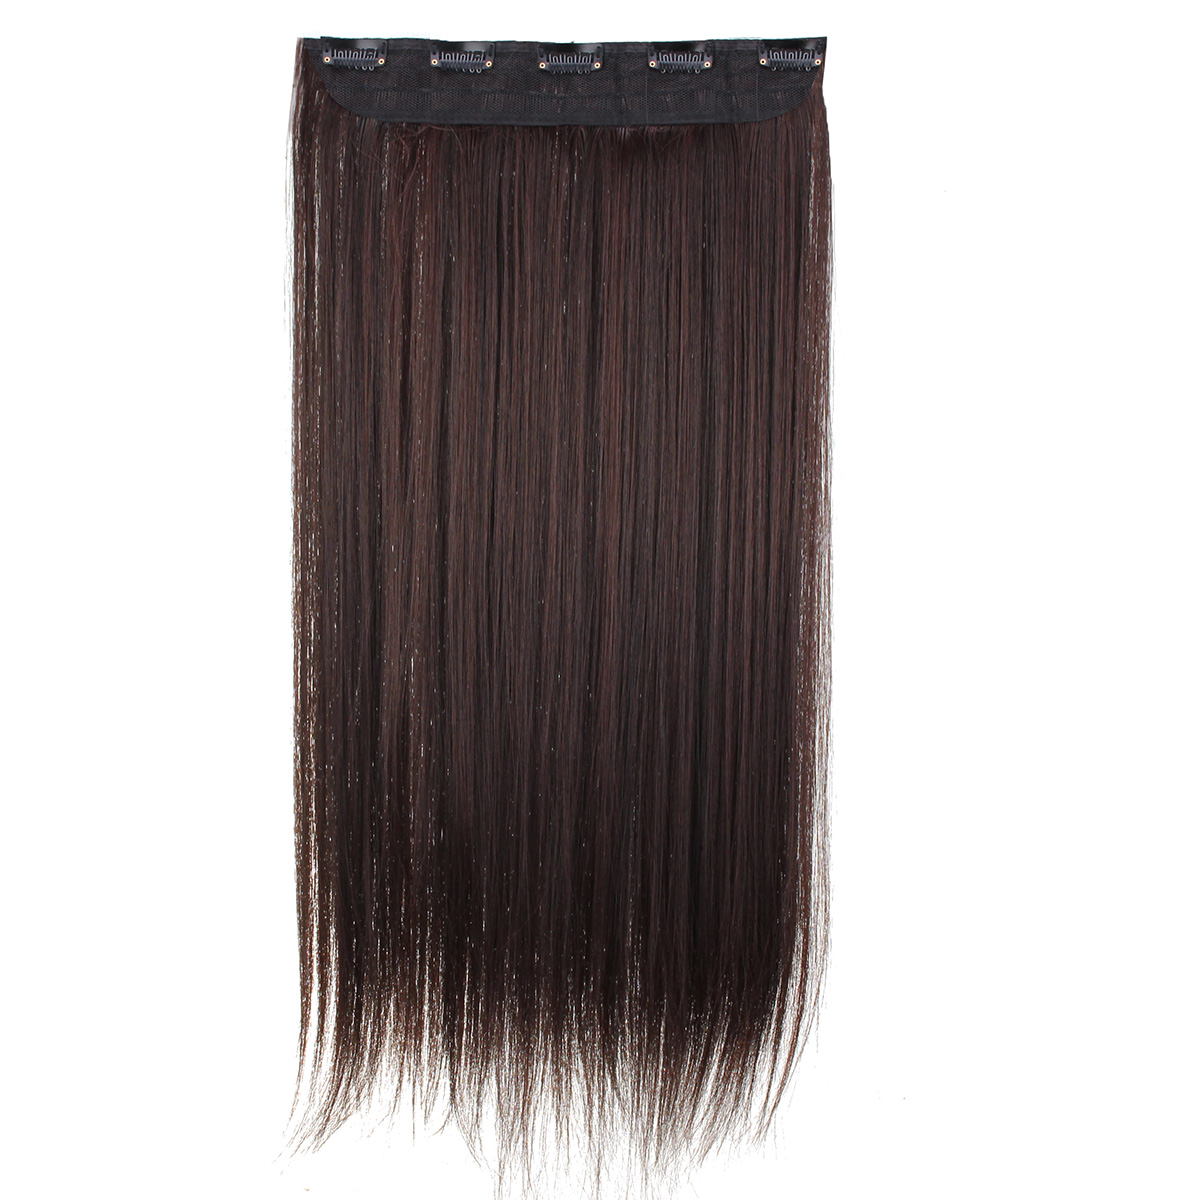 Women Clip In Hair Extensions Long Straight Curly With 5 Clips At